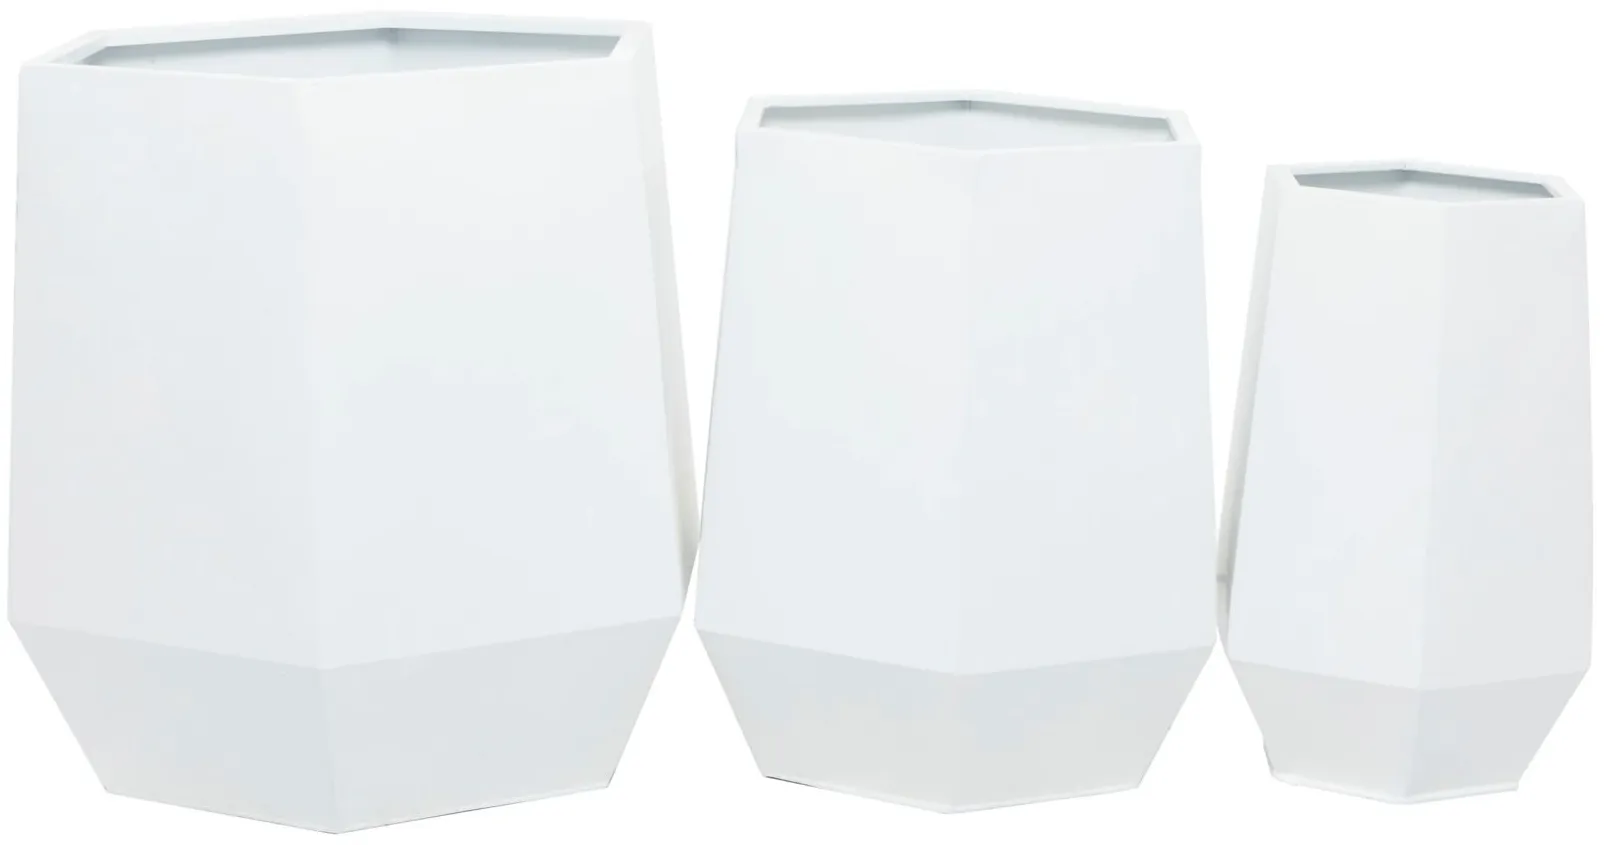 Ivy Collection Marchenkind Planter: Set of 3 in White by UMA Enterprises